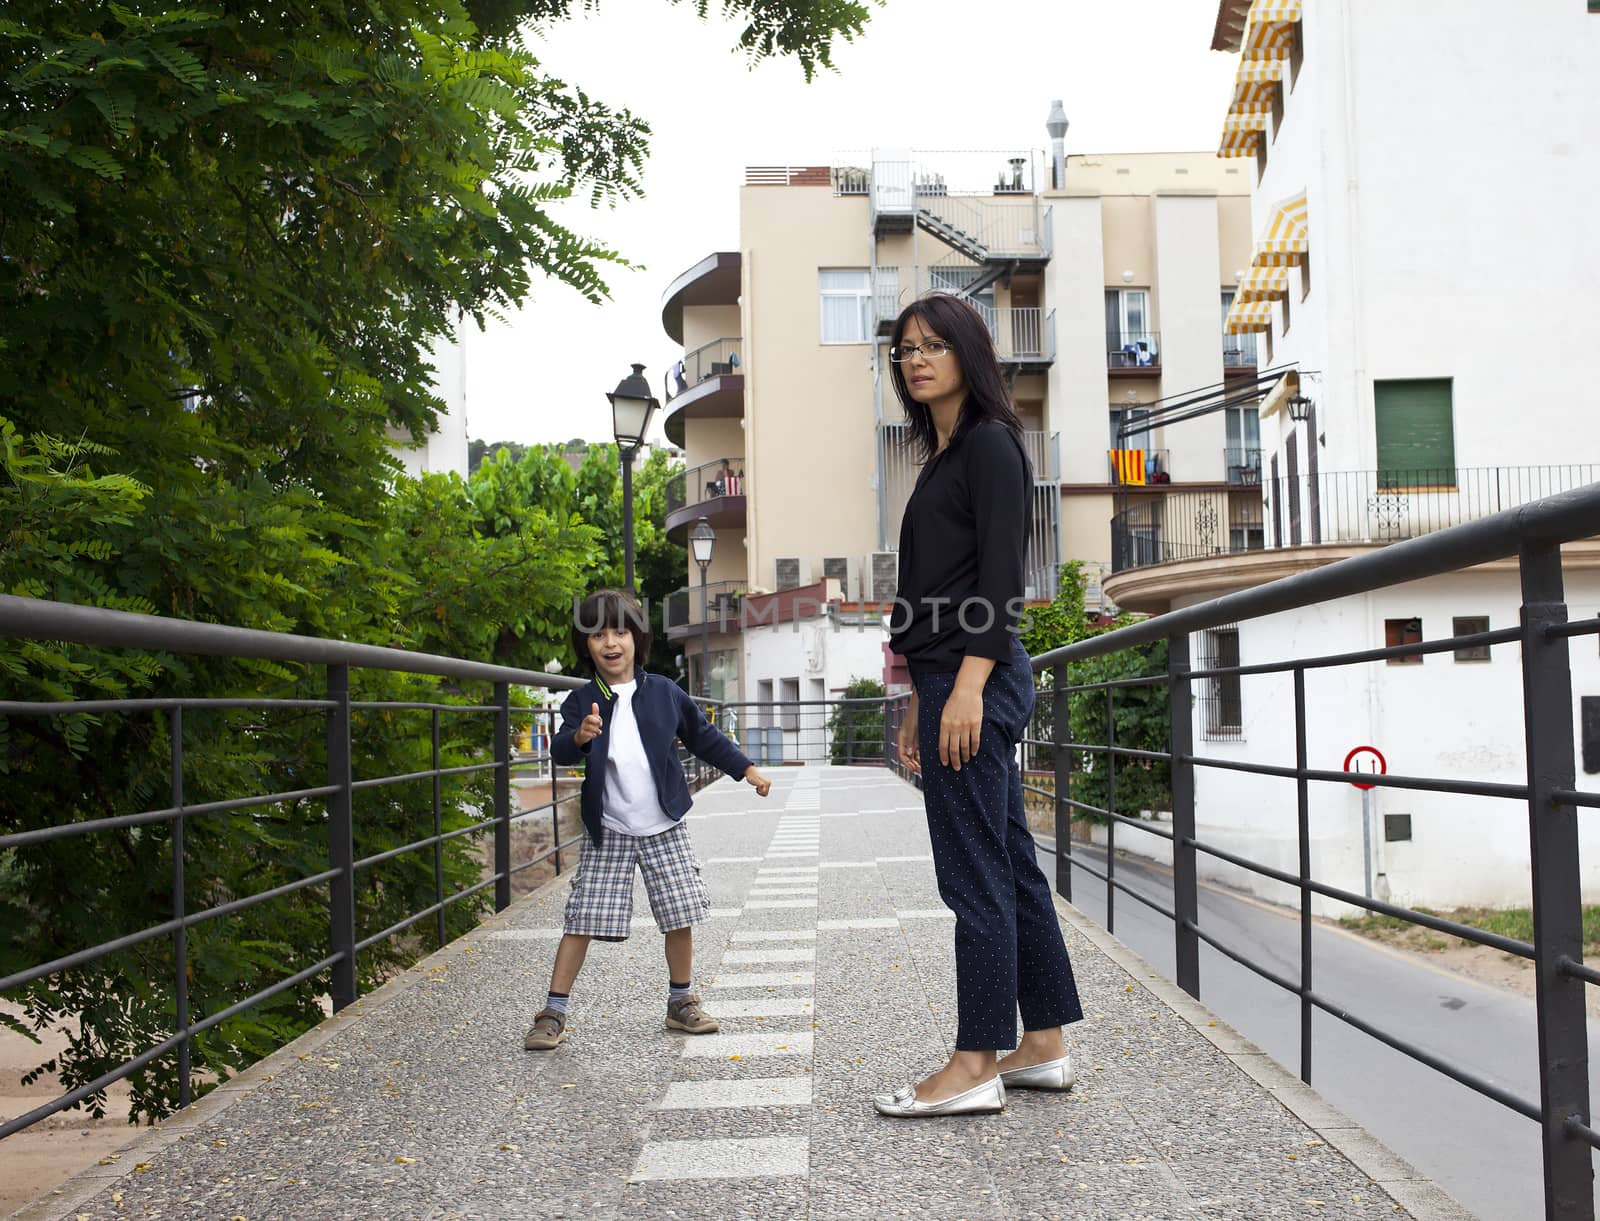 mother and son on the bridge, the boy shows thumbs up